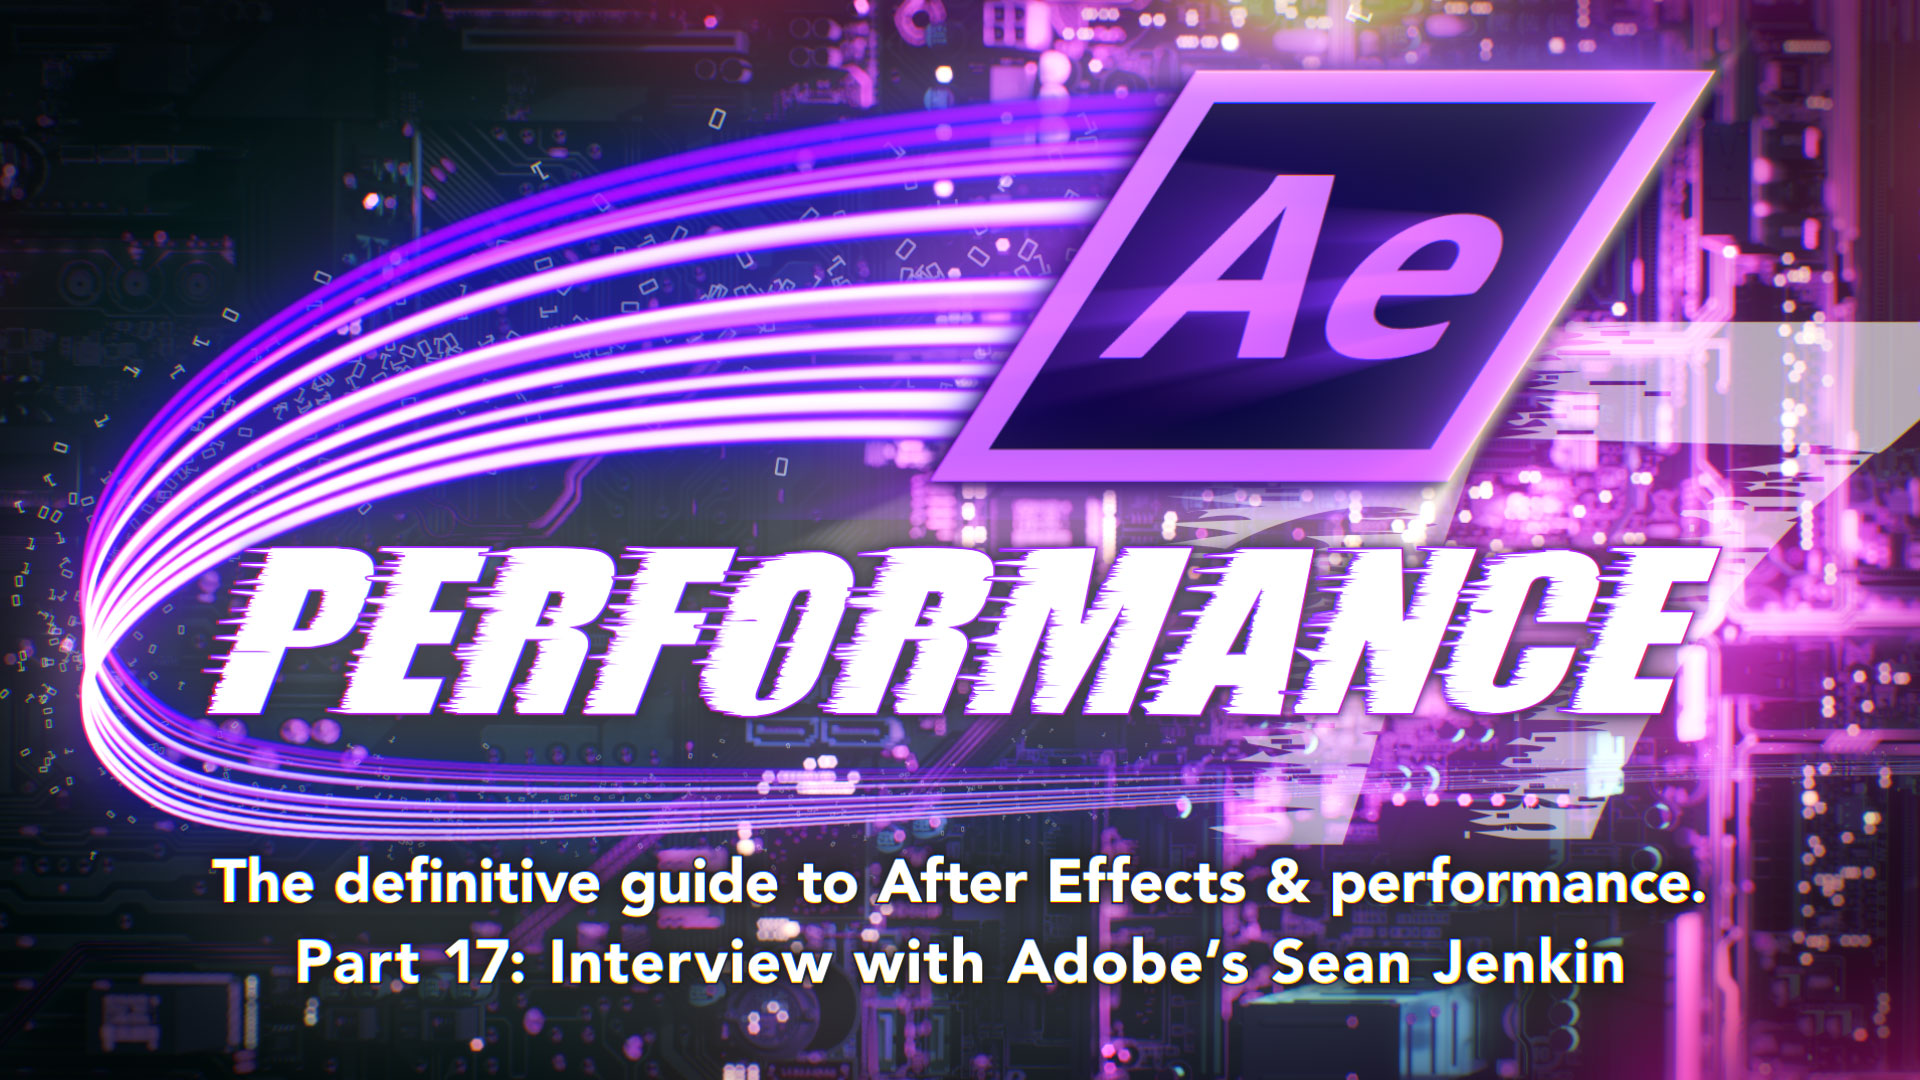 After Effects & Performance. Part 17: Interview with Sean Jenkin from Adobe 6